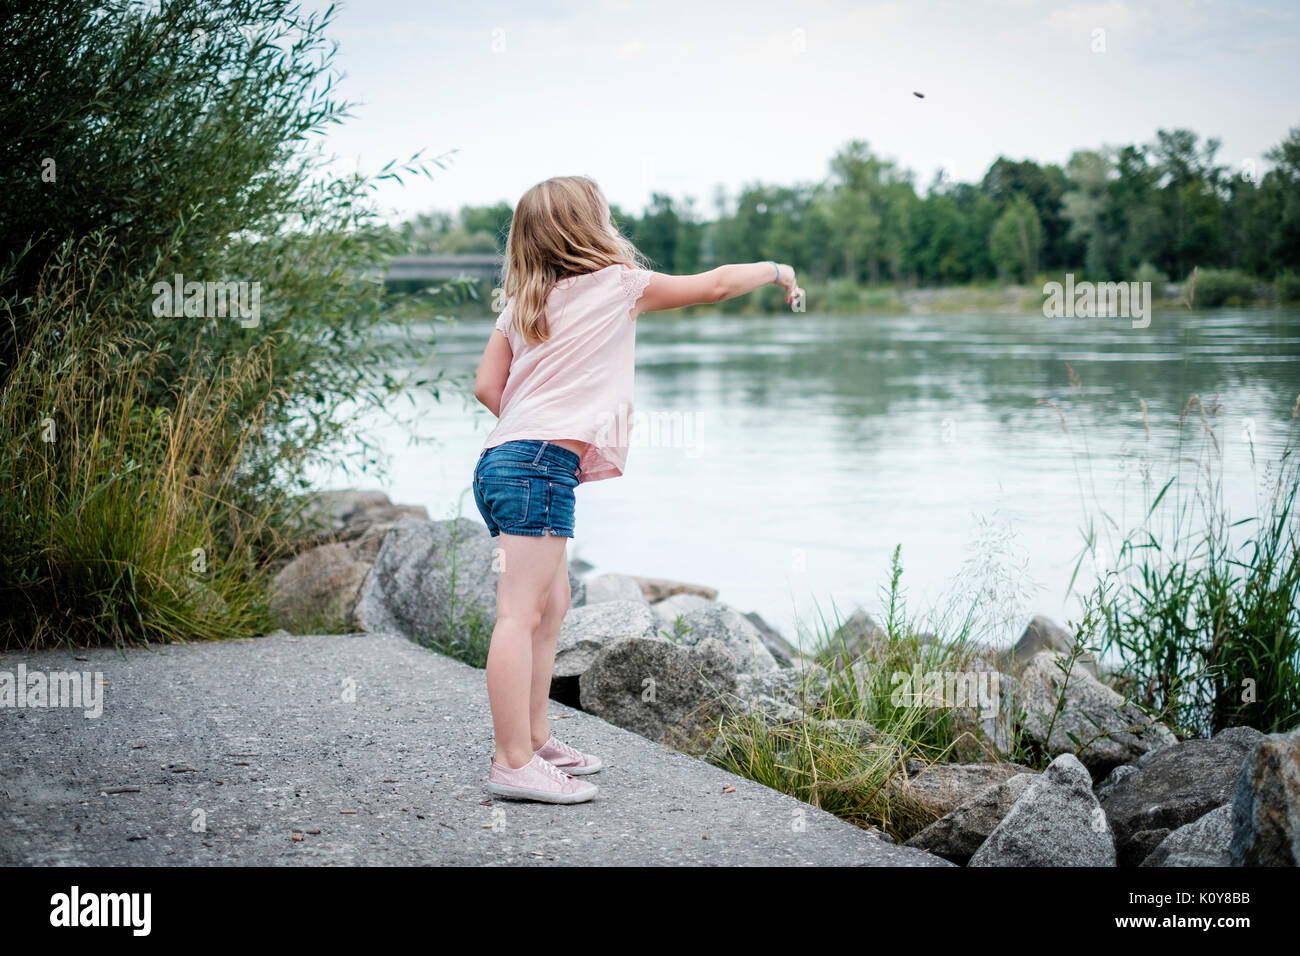 Little girl throwing stones into a river Stock Photo